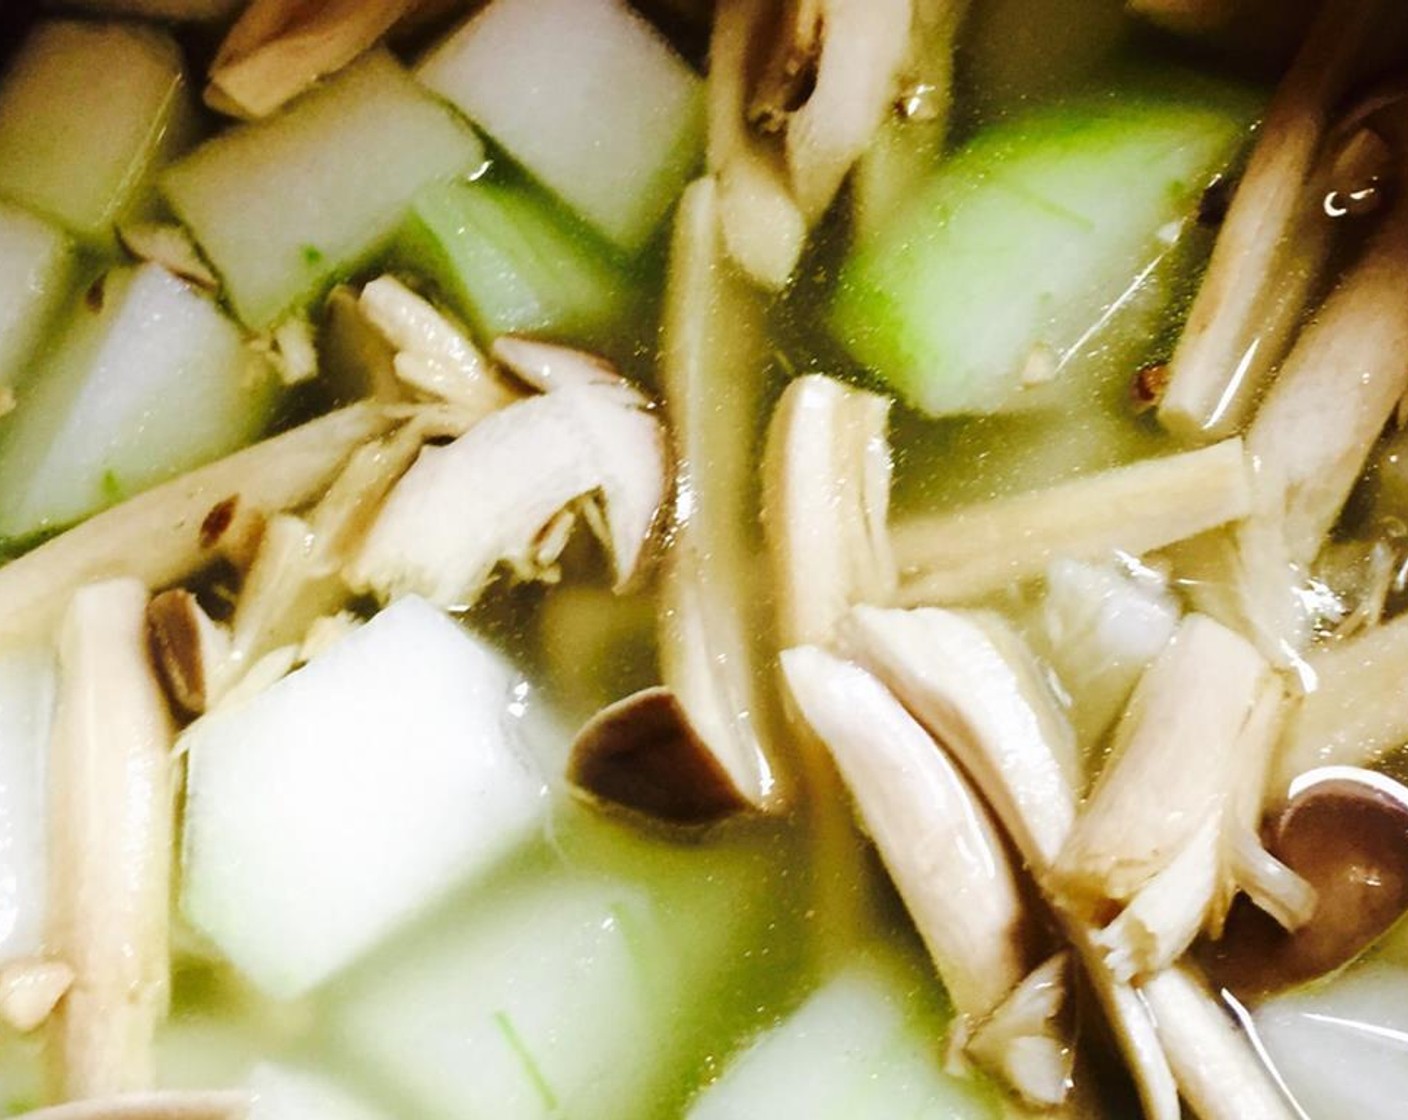 step 4 Bring the Vegetable Stock (2 cups) to a boil and add the winter melon, mushrooms, ham, and Salt (1 tsp). Reduce to simmer for 20 minutes or until melon is slightly soft.